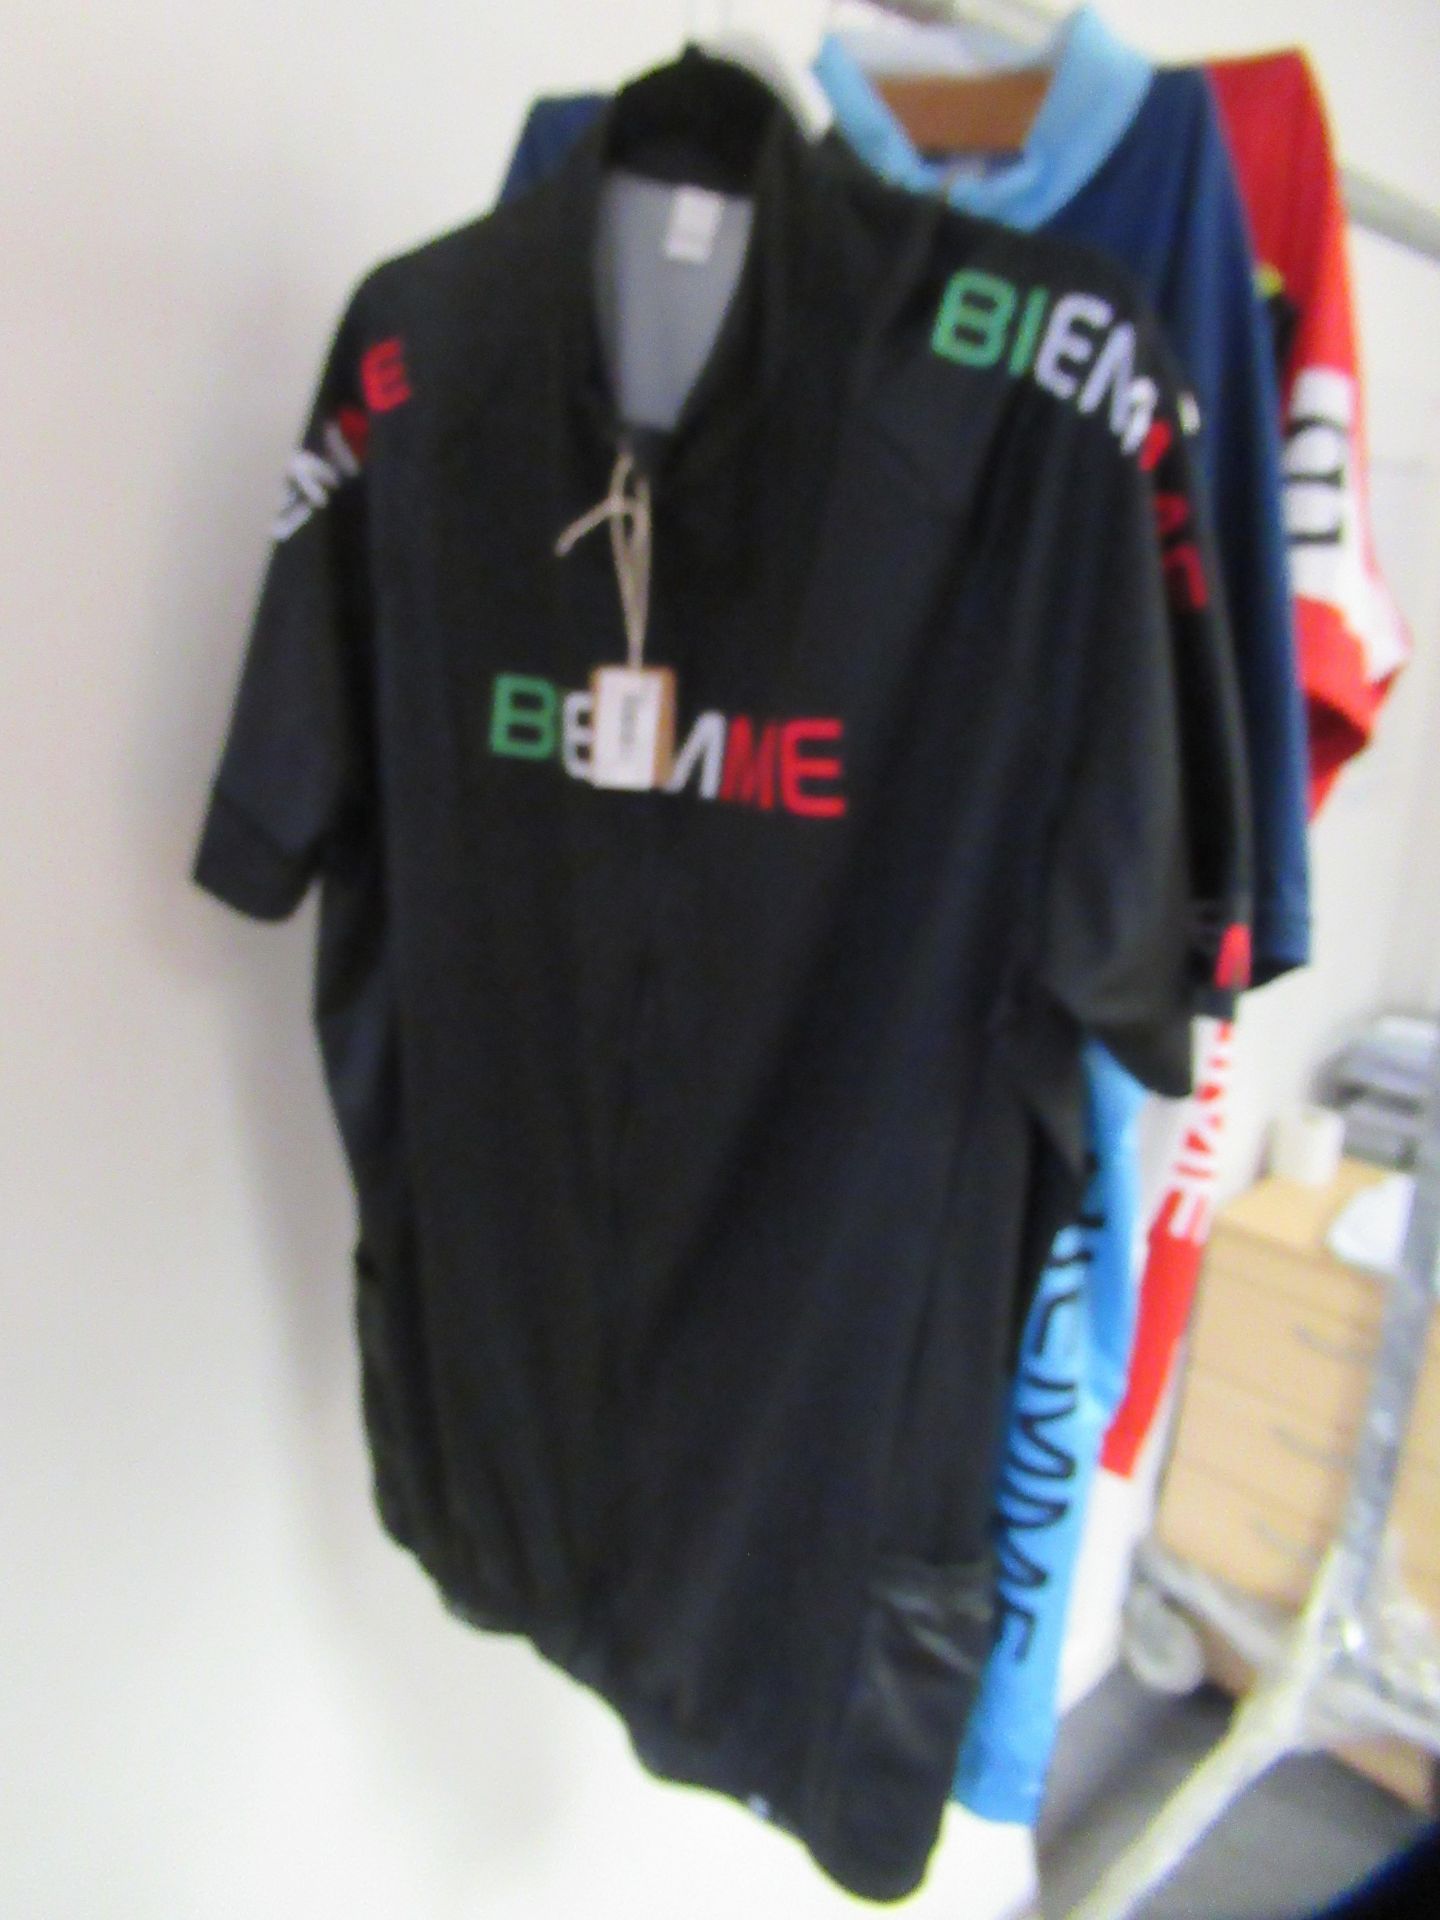 Male Cycling Clothes - Image 2 of 6